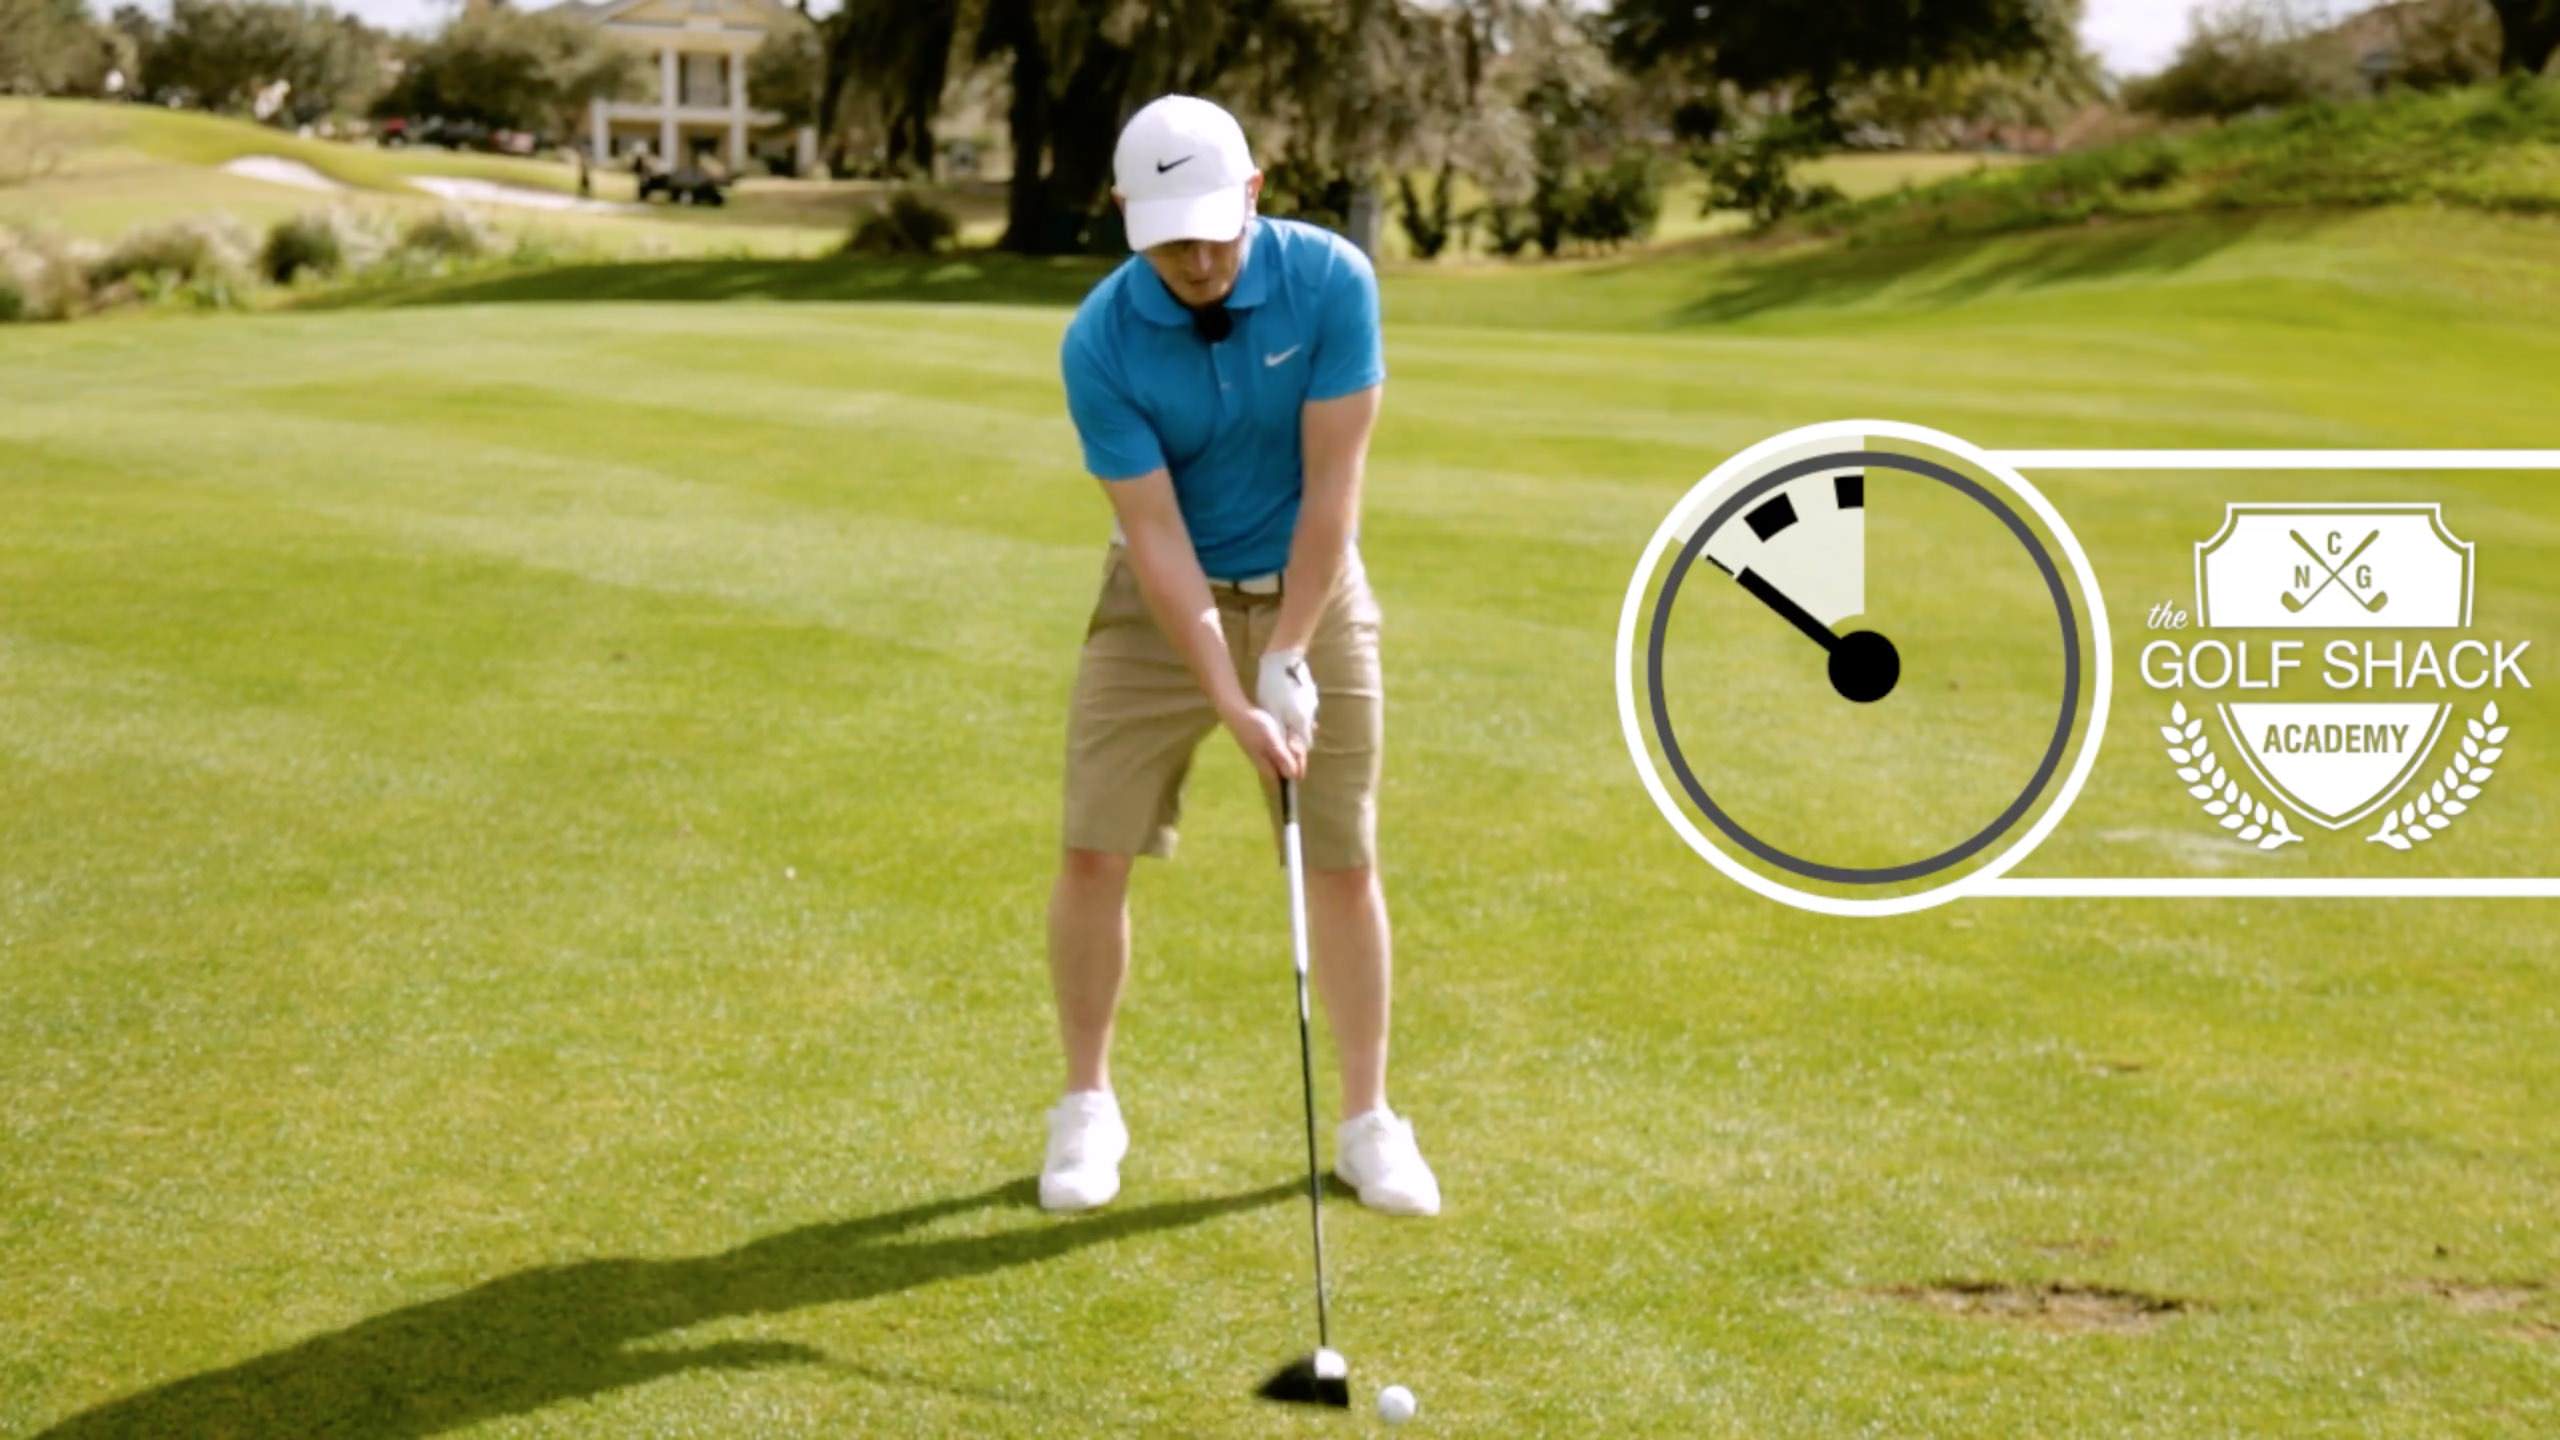 Second Hand Shorts 15: Maximise your driving distance